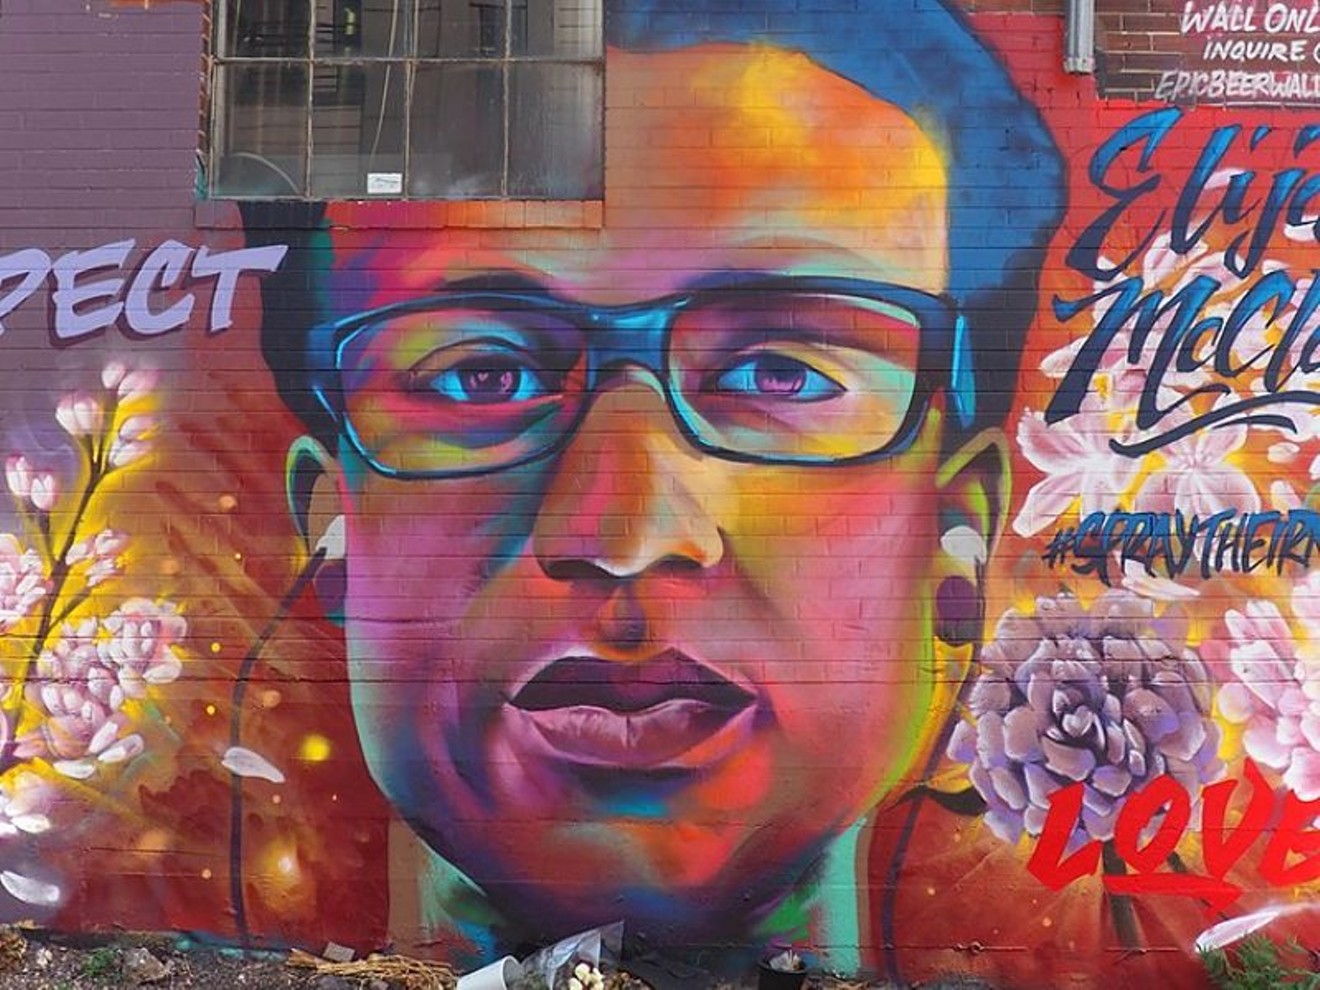 Elijah McClain has been remembered in everything from this mural at 30th and Walnut streets to John Lewis's last essay.